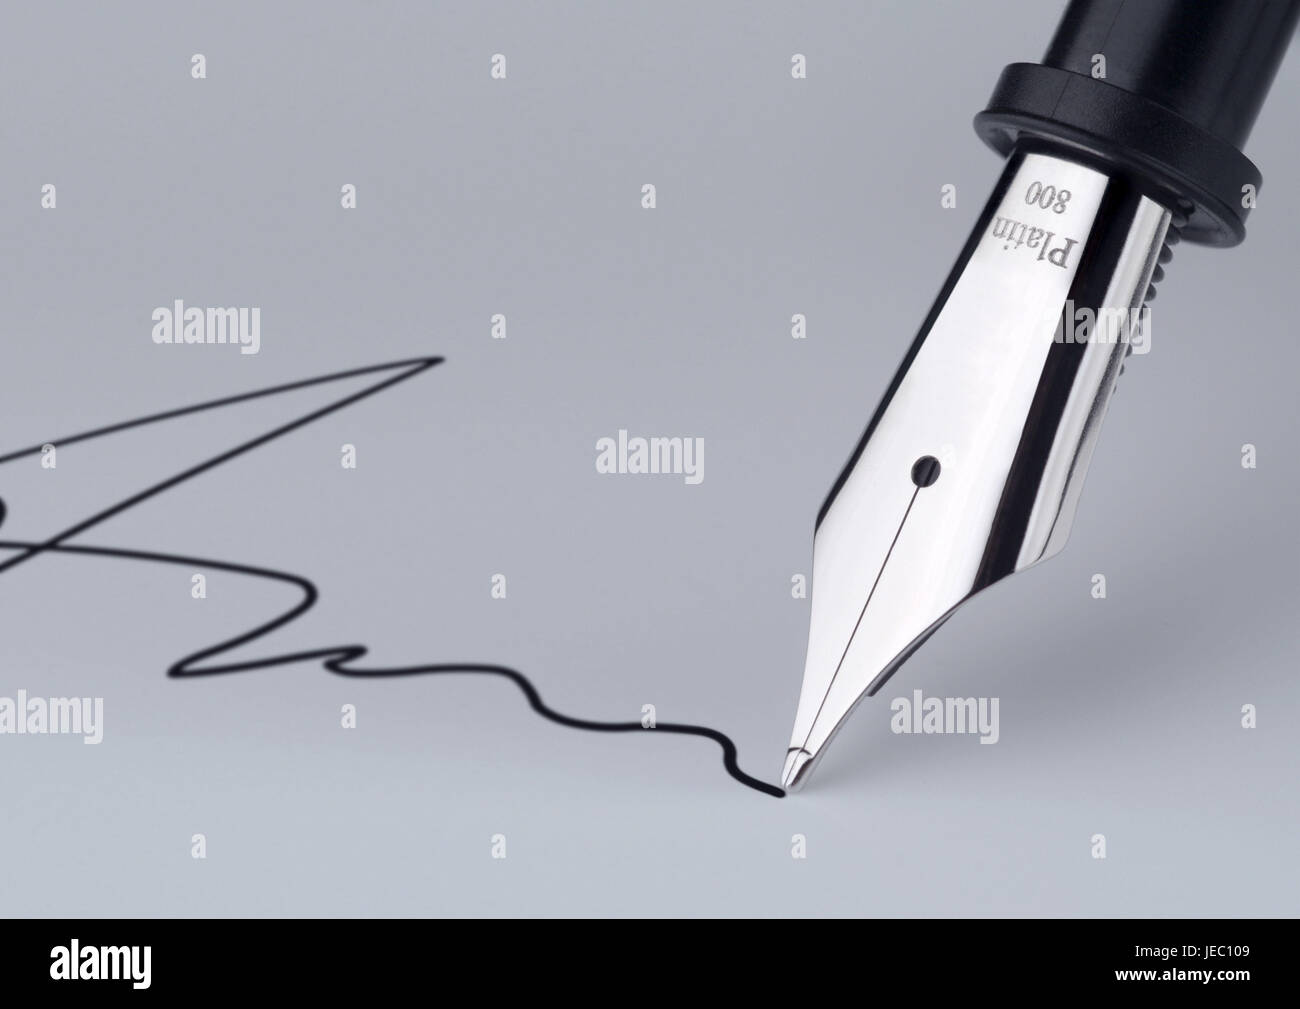 Board writing feather of a fountain pen with iridium point, Stock Photo